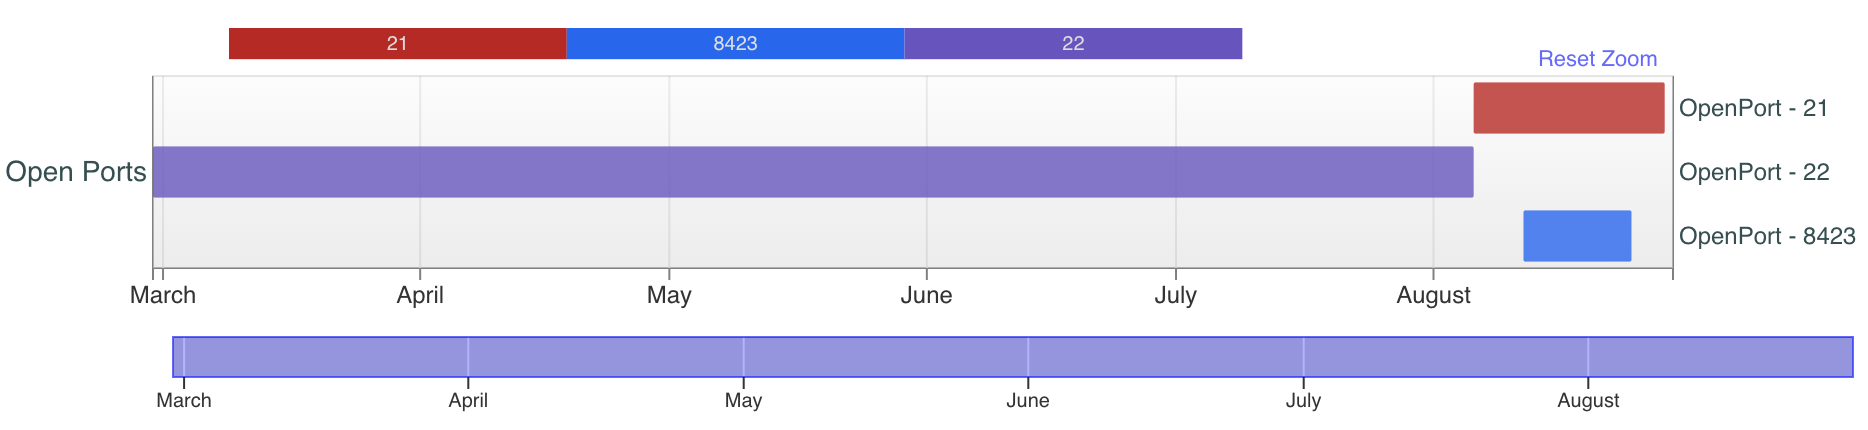 Image 11 is the timeline of the open ports 21, 22, and 8423. The timeline goes from March through August 2023. Port 21 is red. Port 8423 is blue. Port 22 is purple.